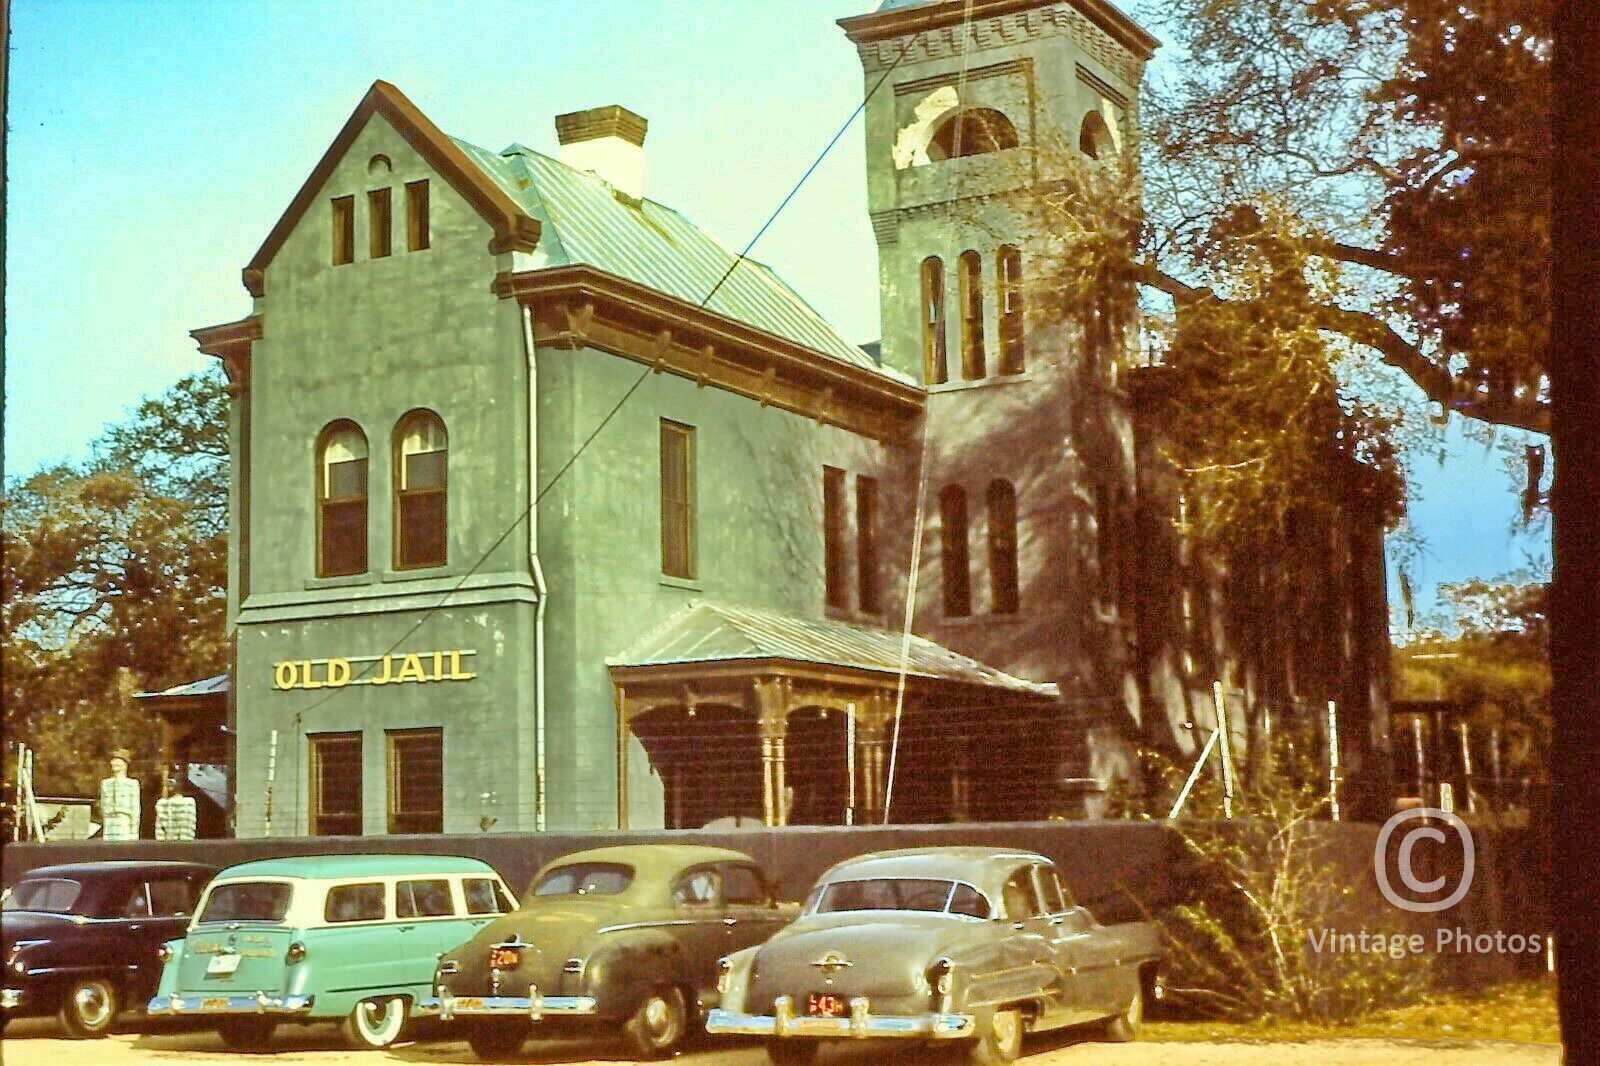 1950s American Old Jail House - Classic Cars